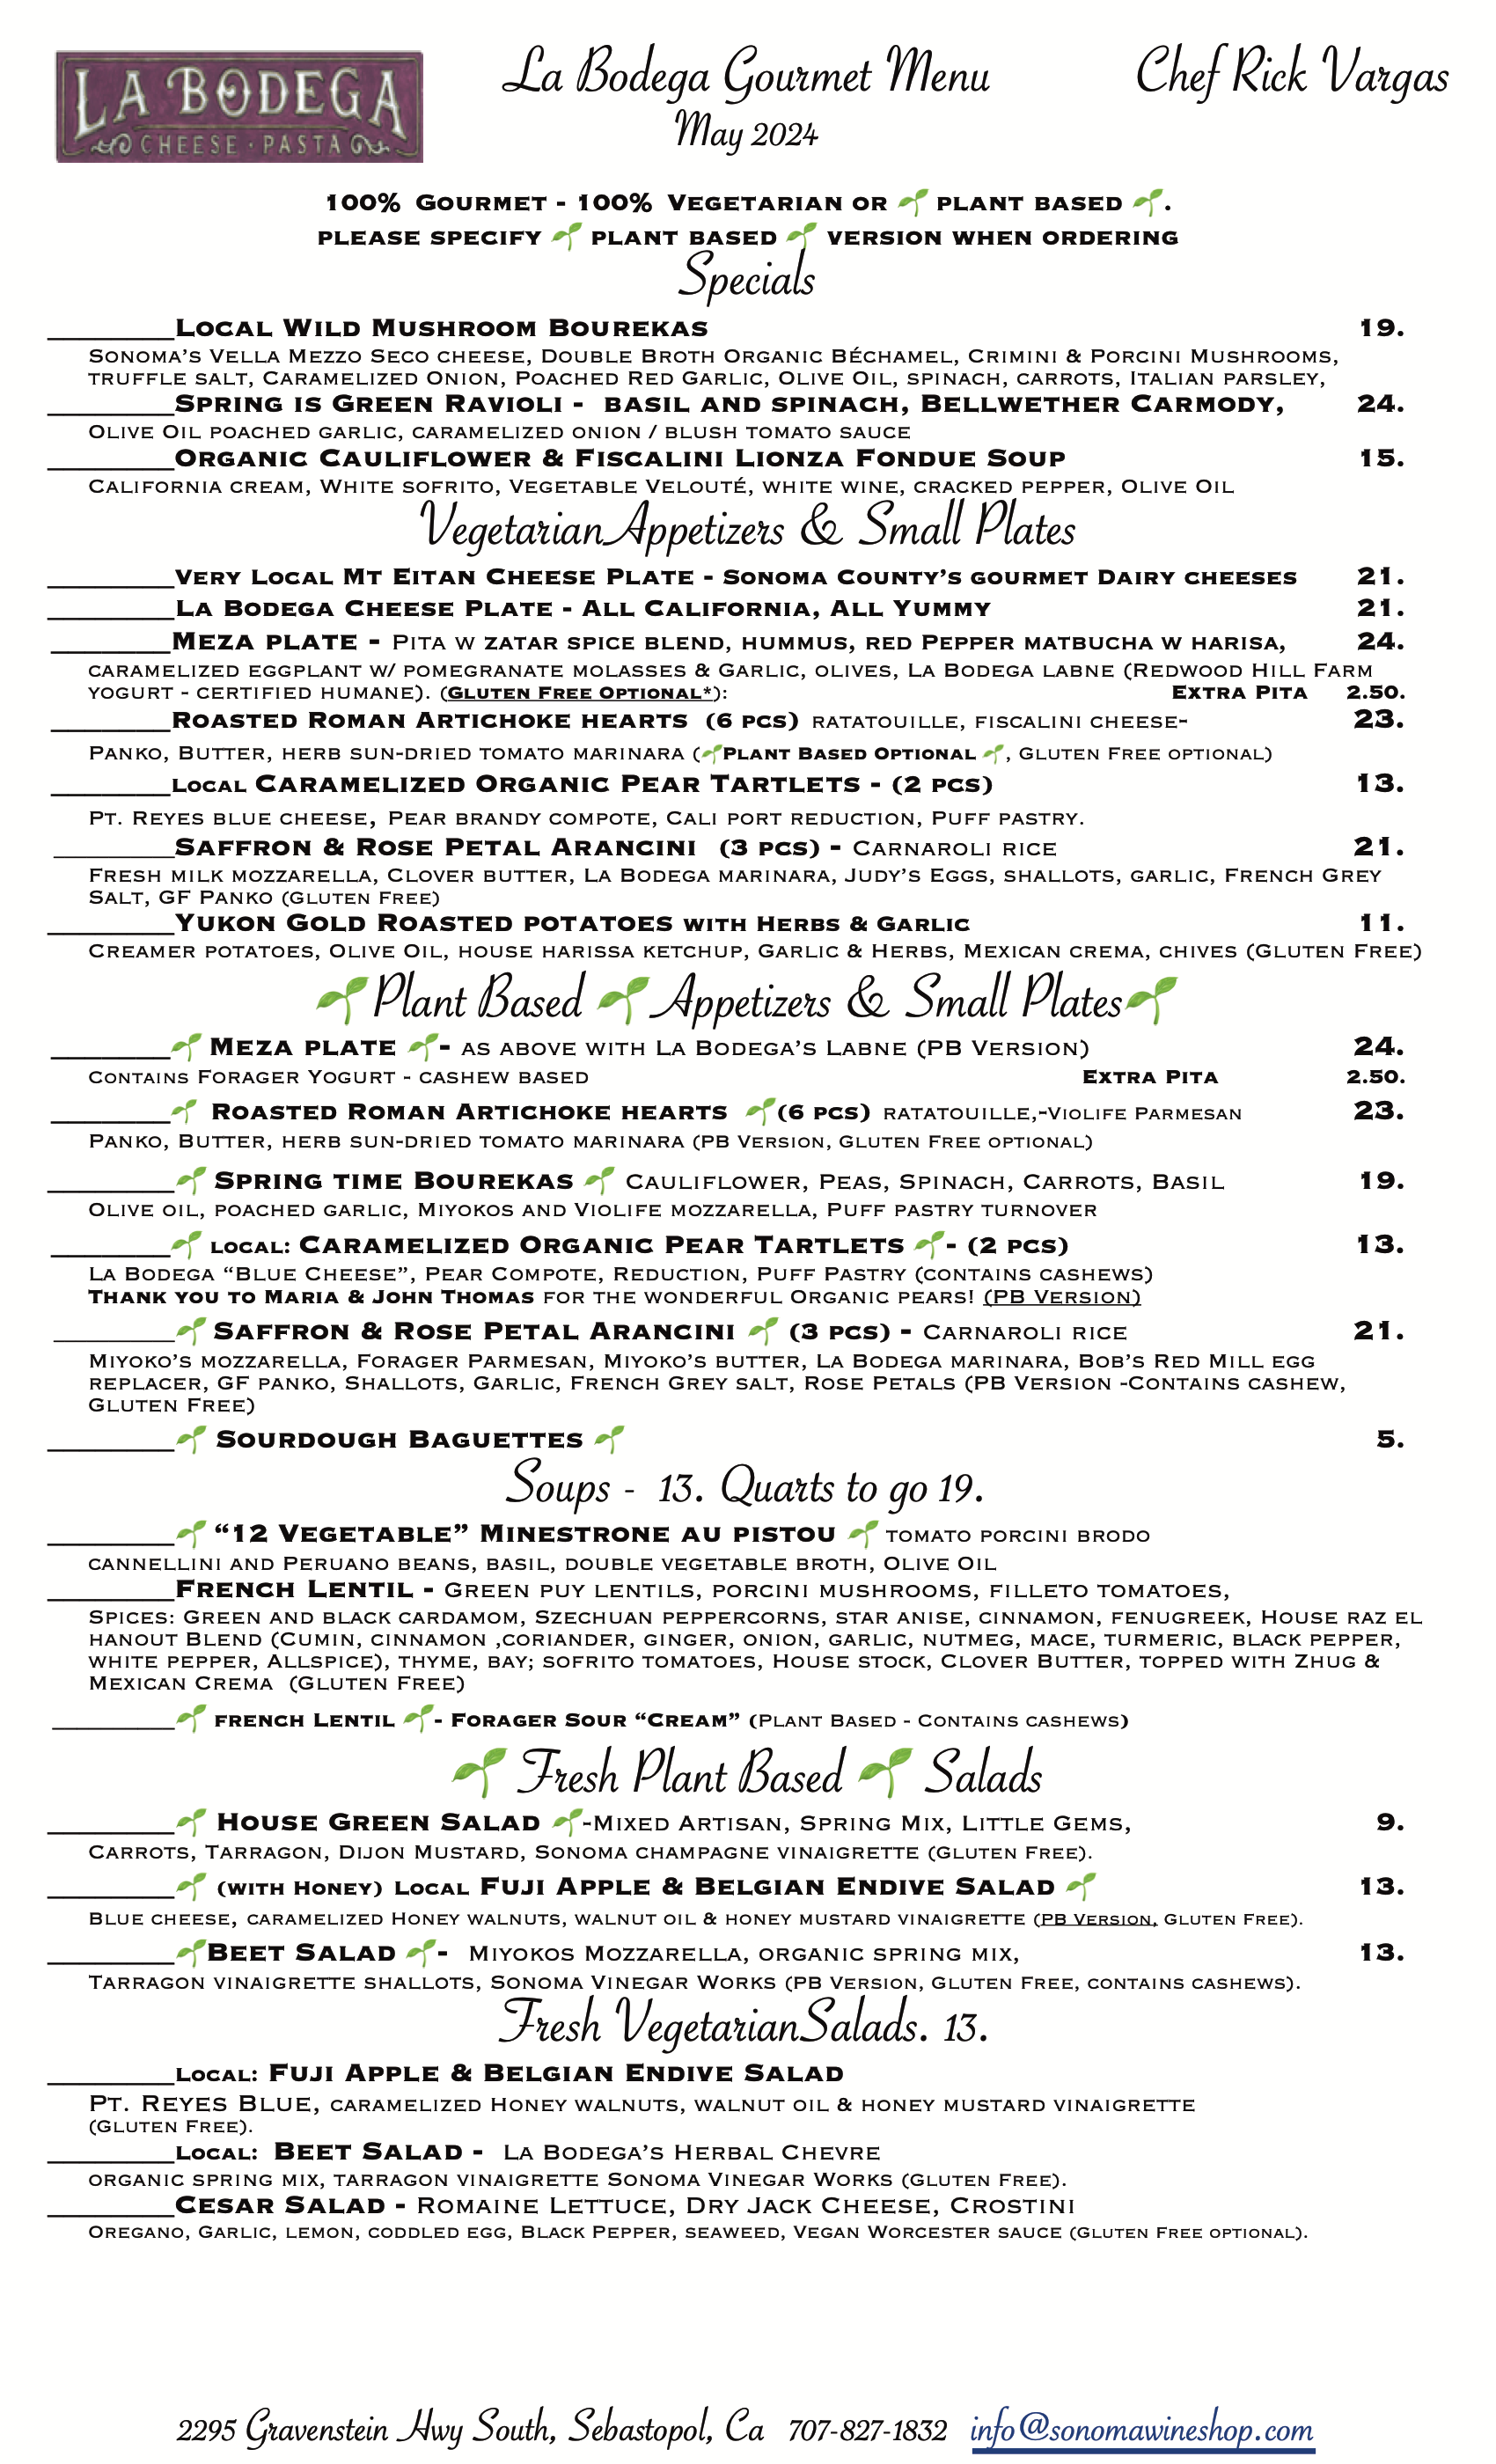 Gourmet Vegetarian and Gourmet Plant Based - Page 1 of 3